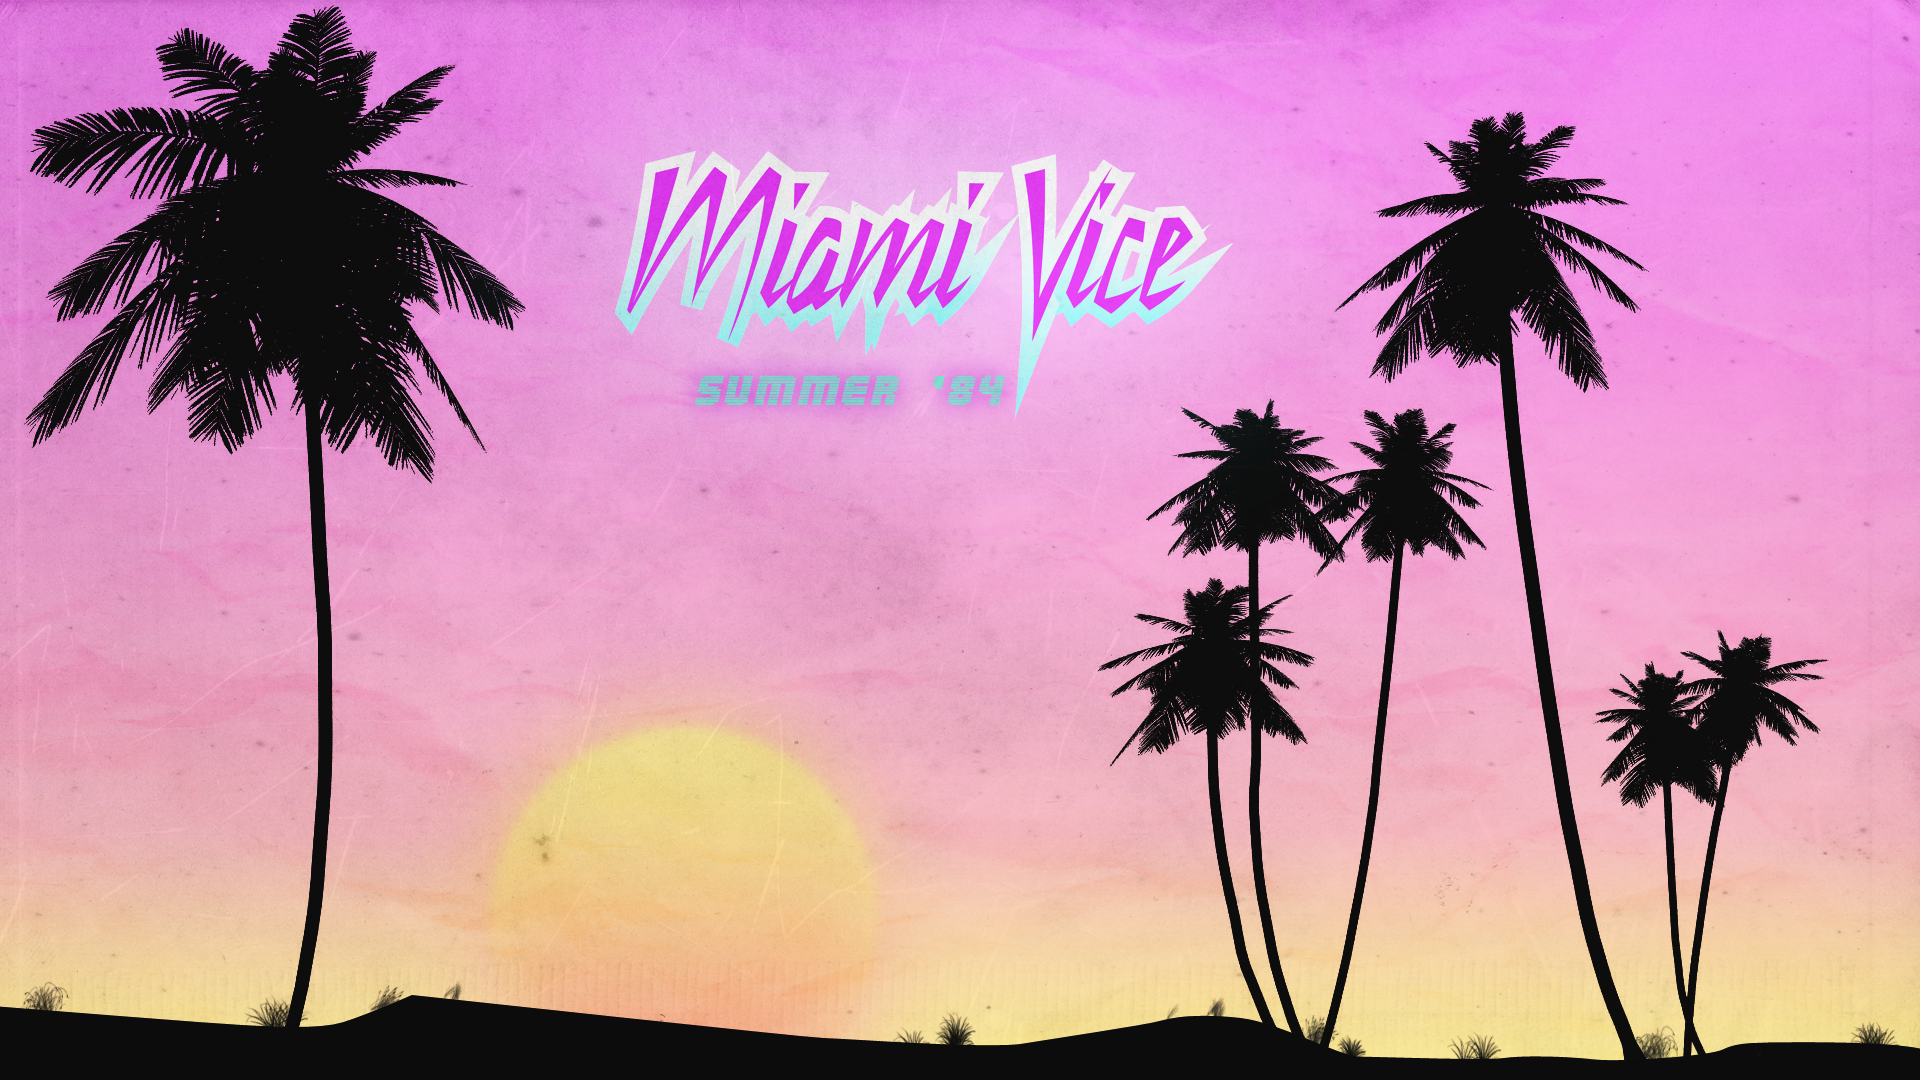 Miami Vice 4K Wallpapers - Top Free Miami Vice 4K Backgrounds